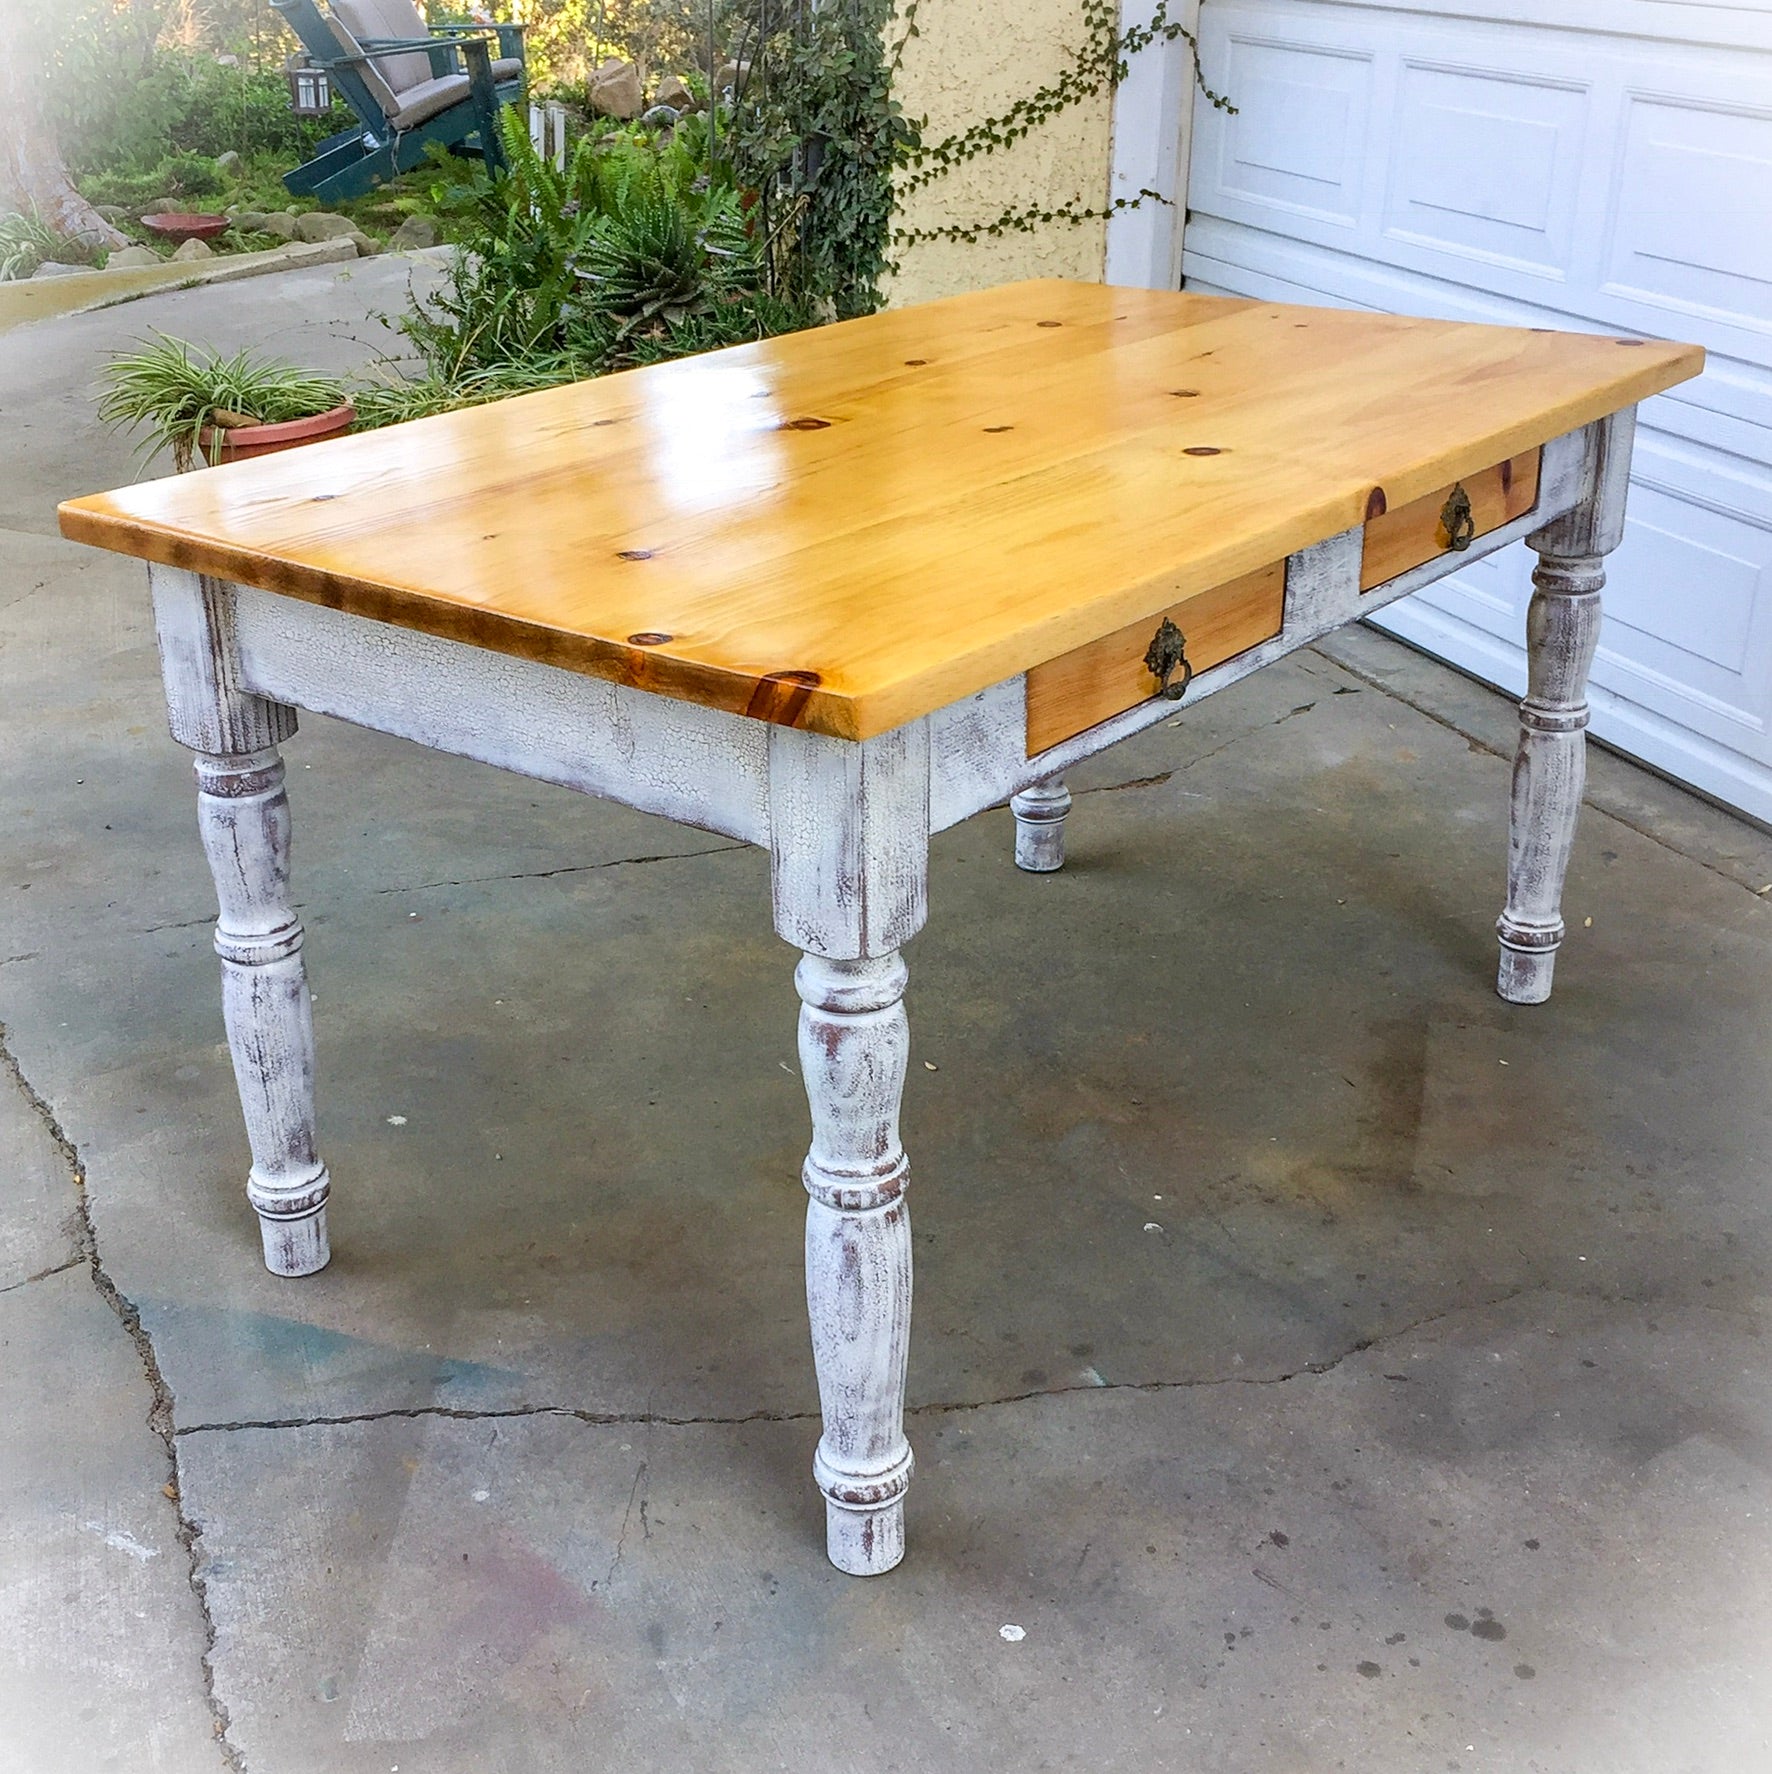 A country kitchen style table, with a knotted pine tabletop, two drawers & a distressed white base.